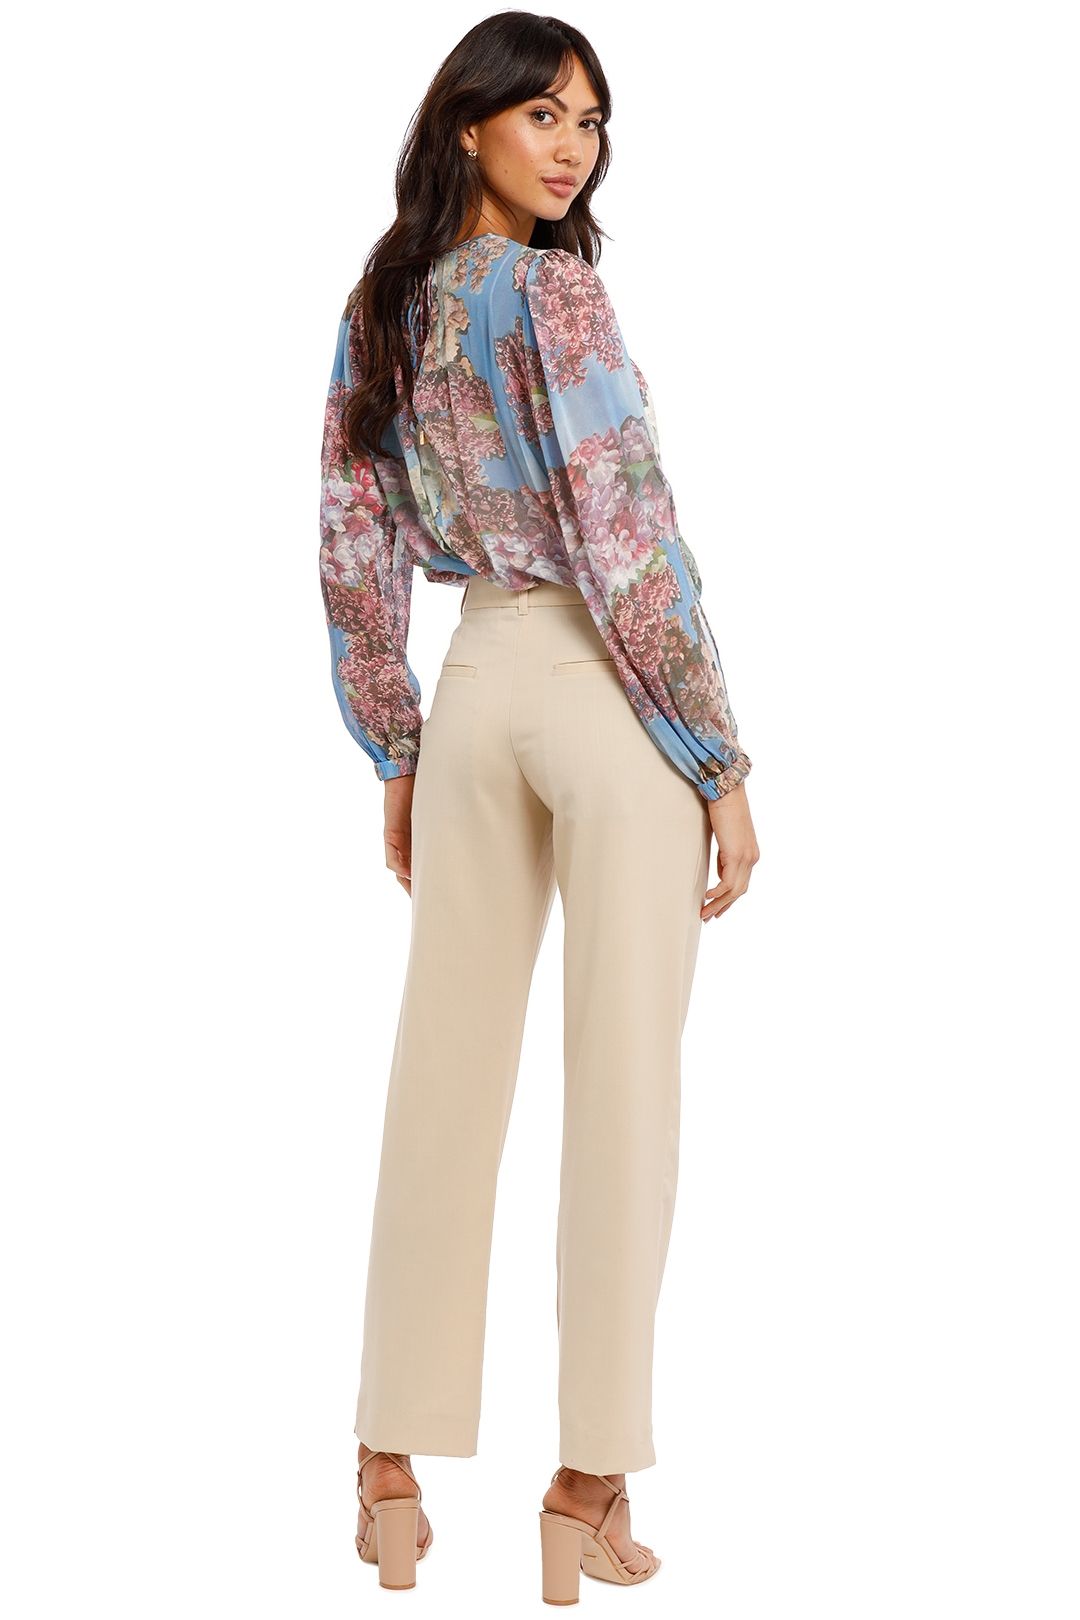 Ginger and Smart New Romantic Blouse Floral